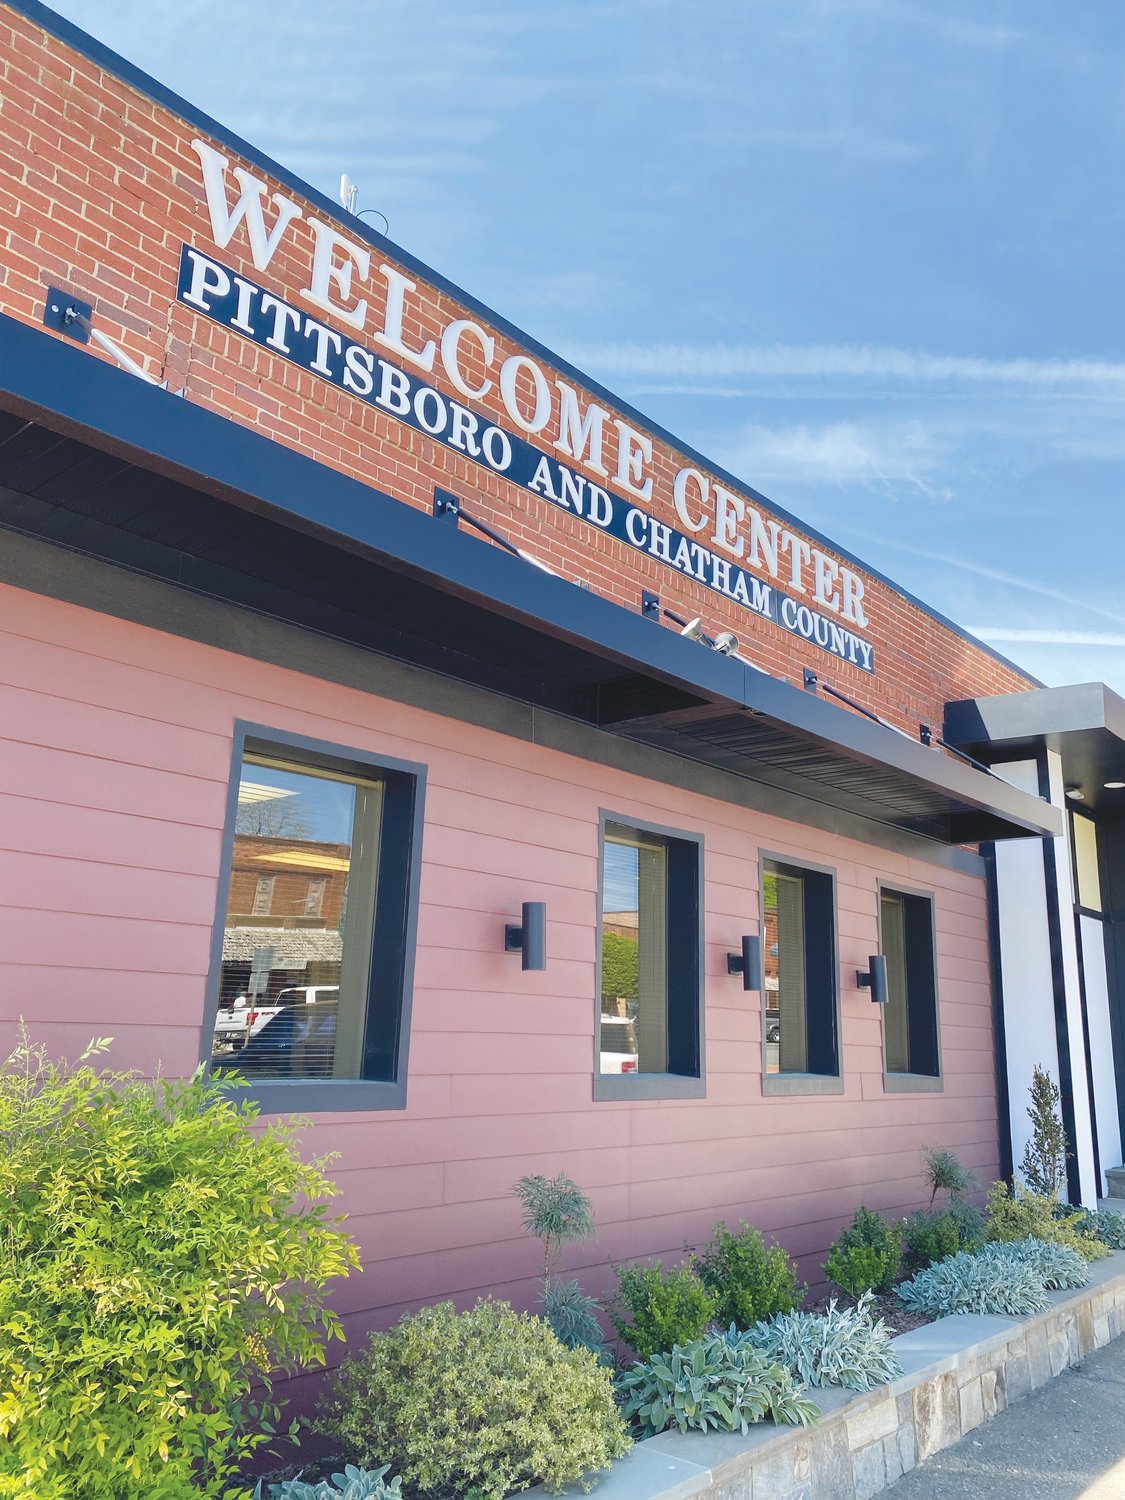 The Welcome Center in Pittsboro is located downtown, adjacent to the traffic circle and historic courthouse.